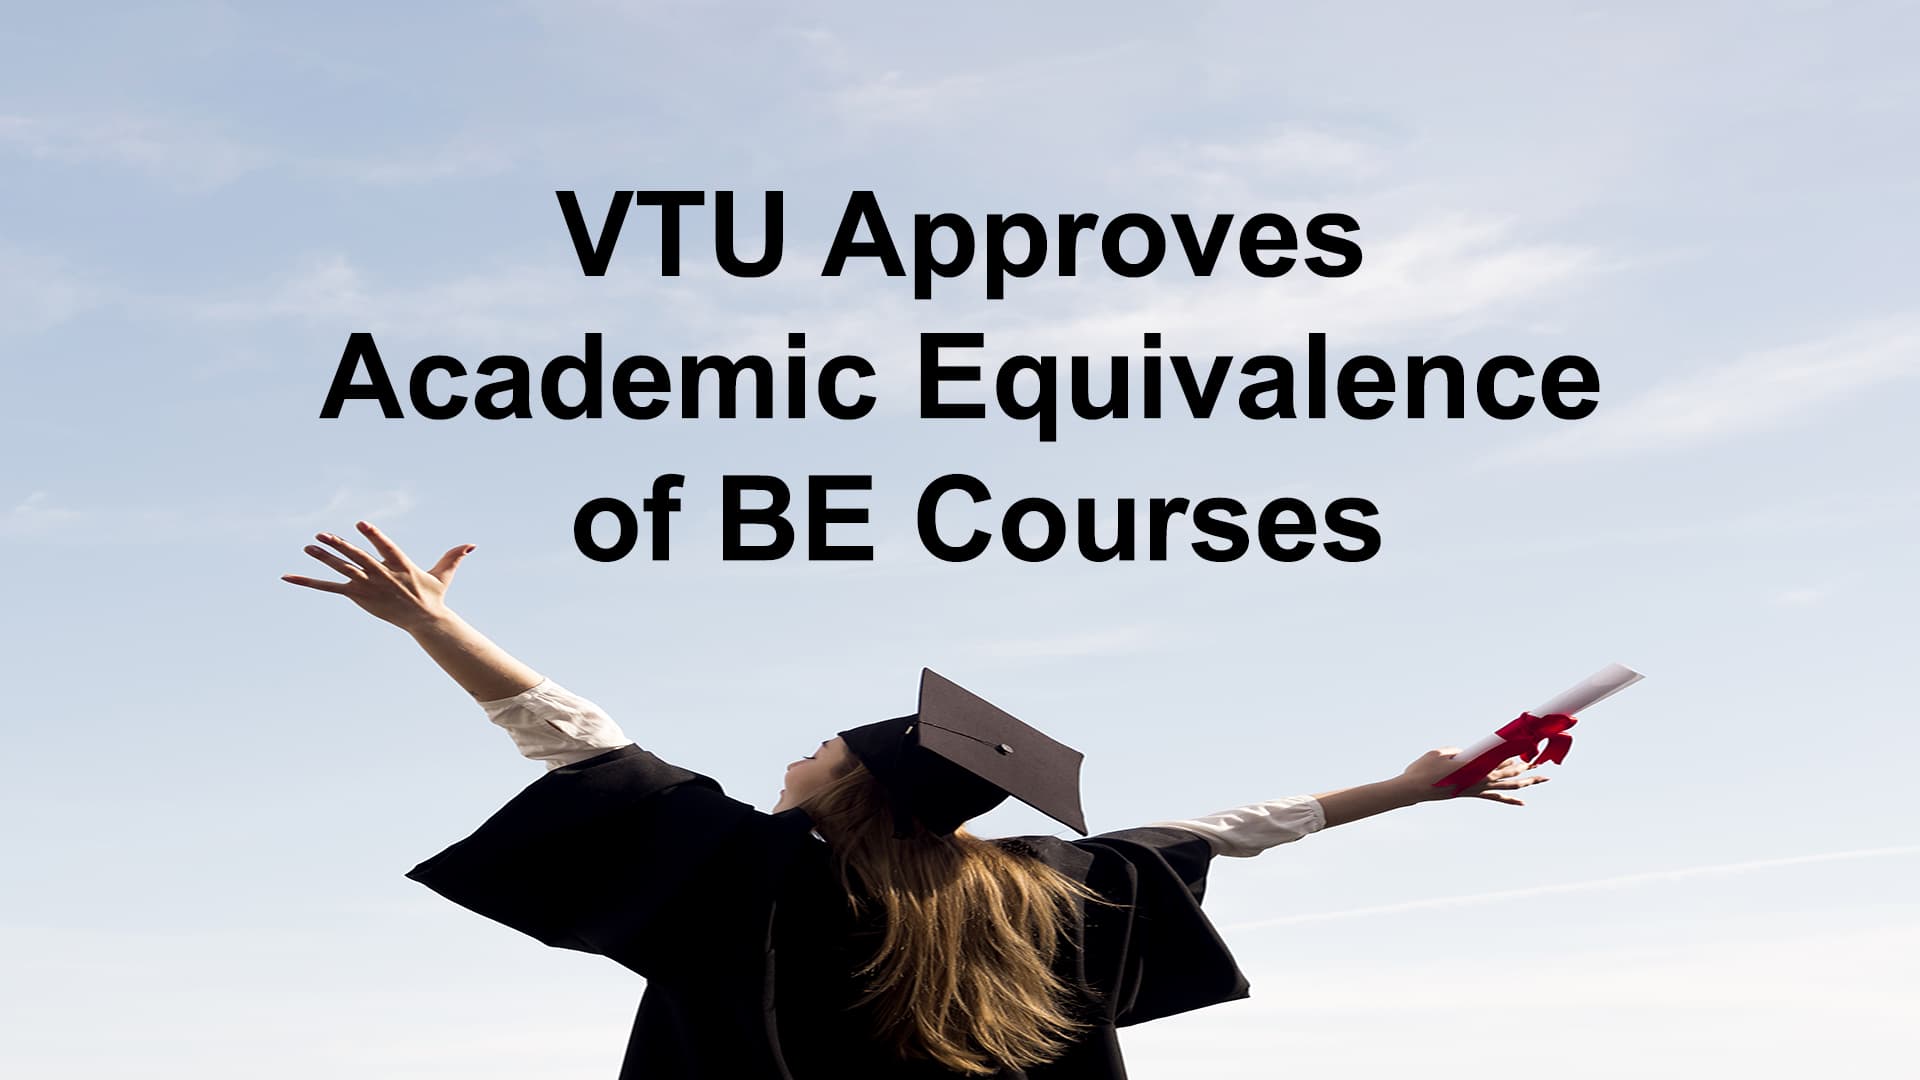 VTU Approves Academic Equivalence of BE Courses